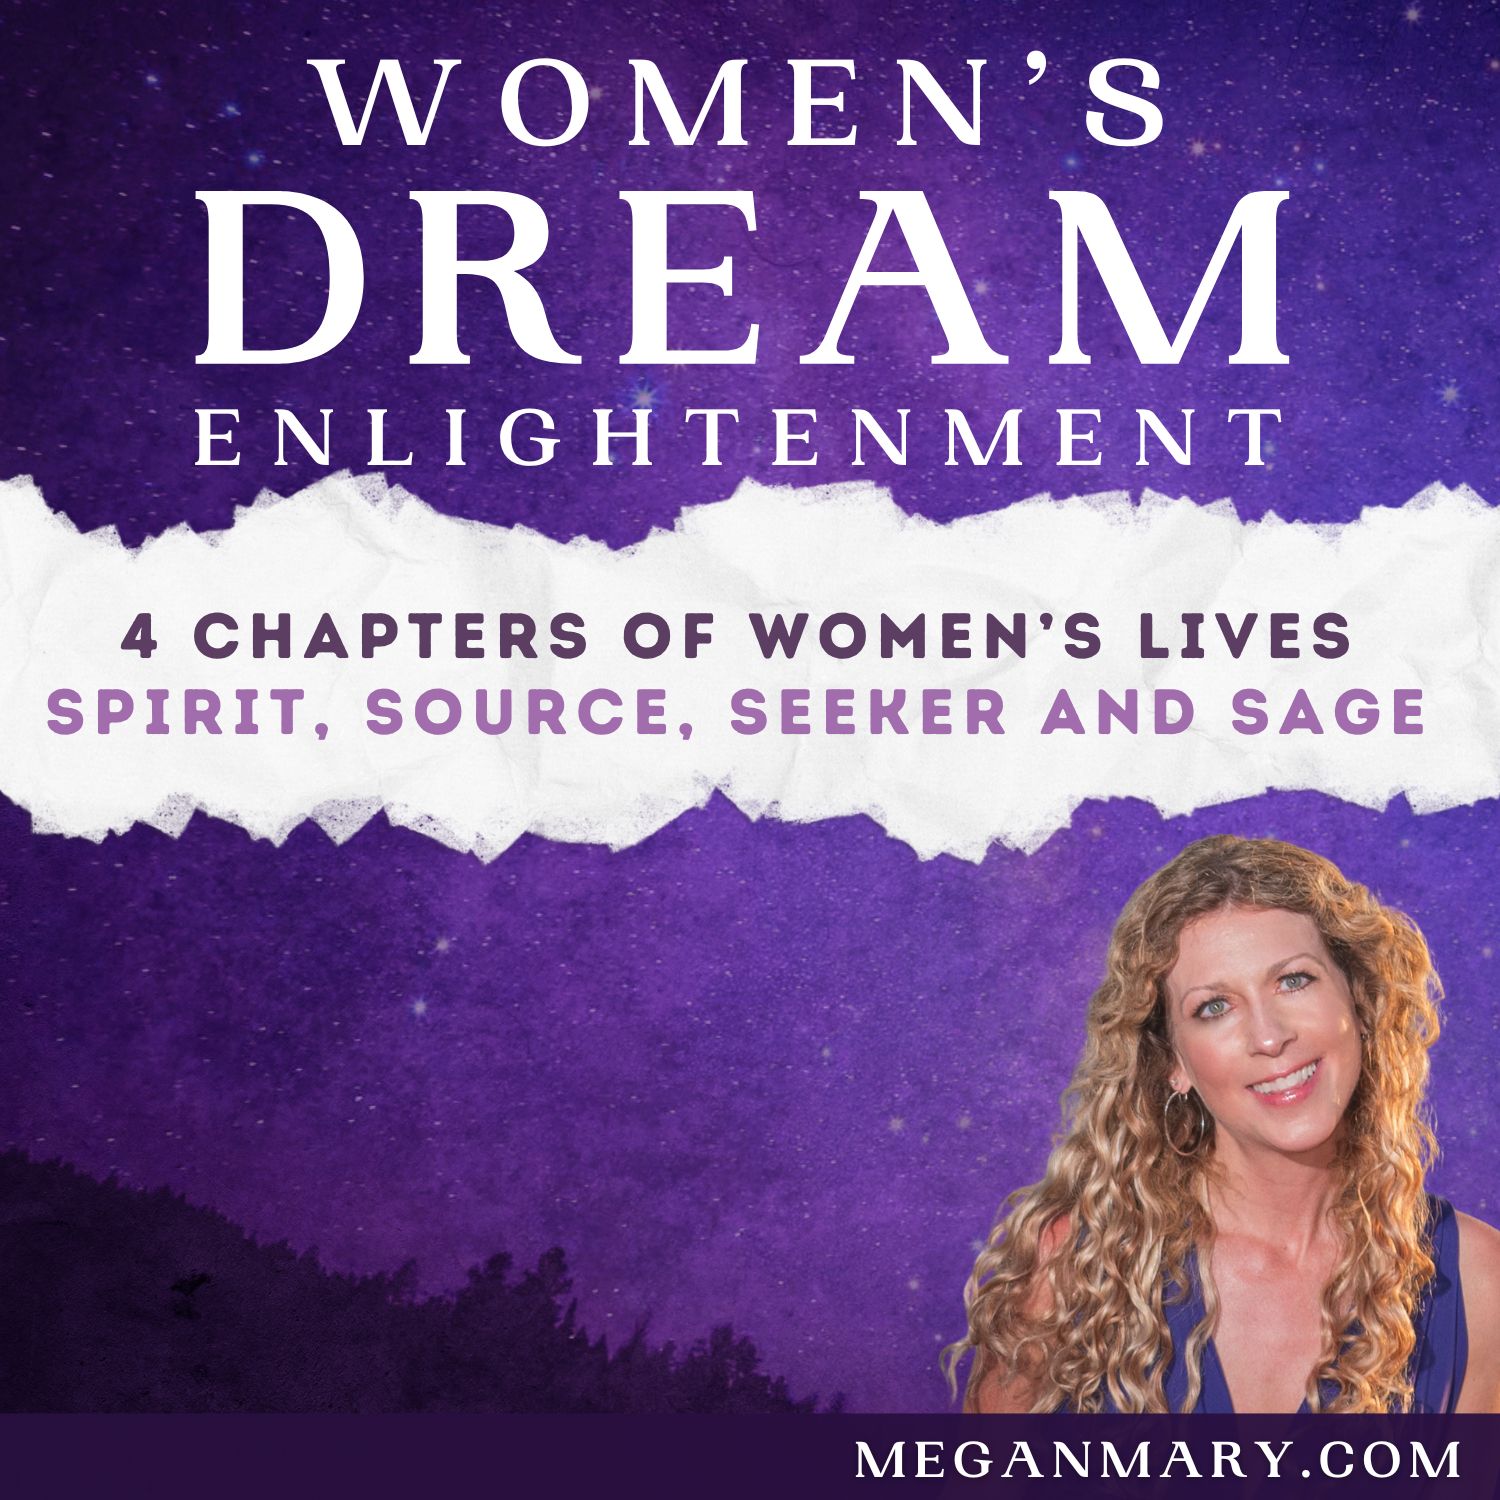 Spirit, Source, Seeker and Sage: A New Paradigm for the 4 Chapters of Women’s Lives: S1E1